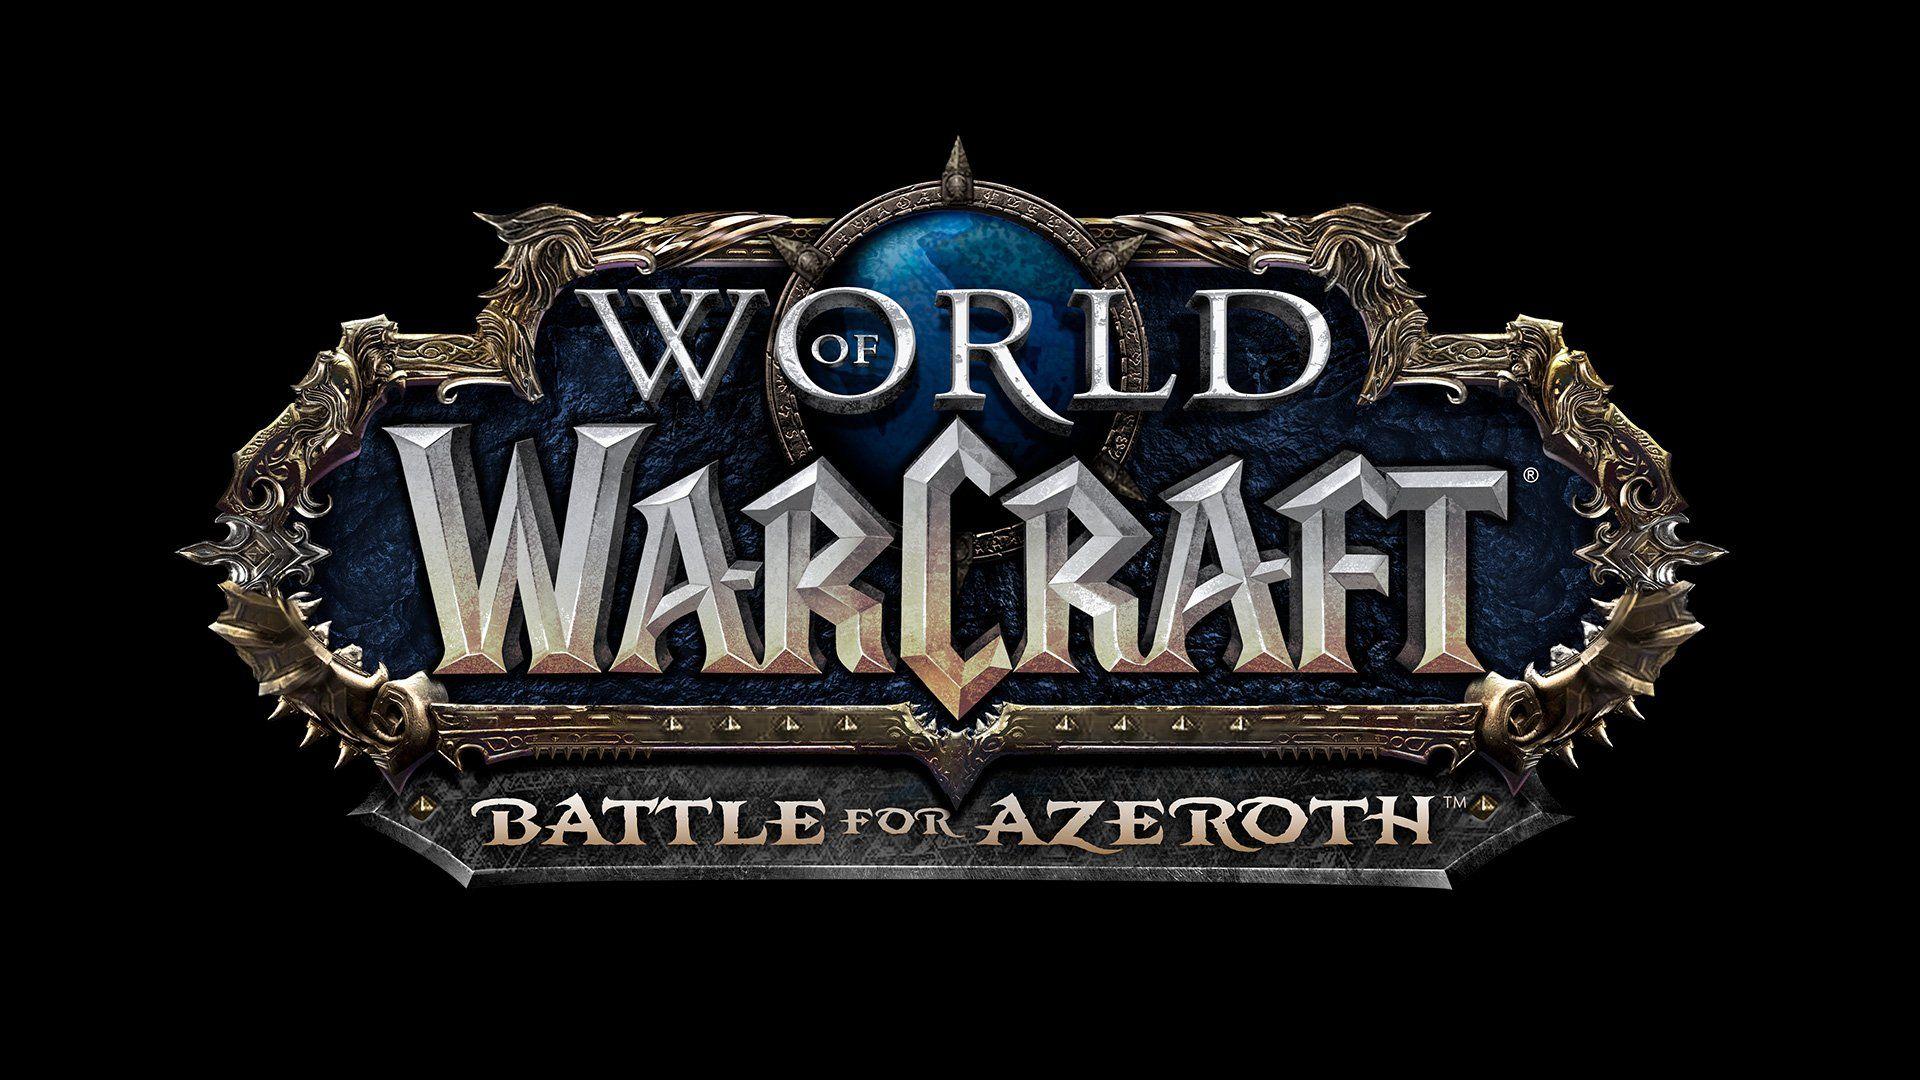 Warcraft Logo - Why is the World of Warcraft: Battle for Azeroth logo blue and gold